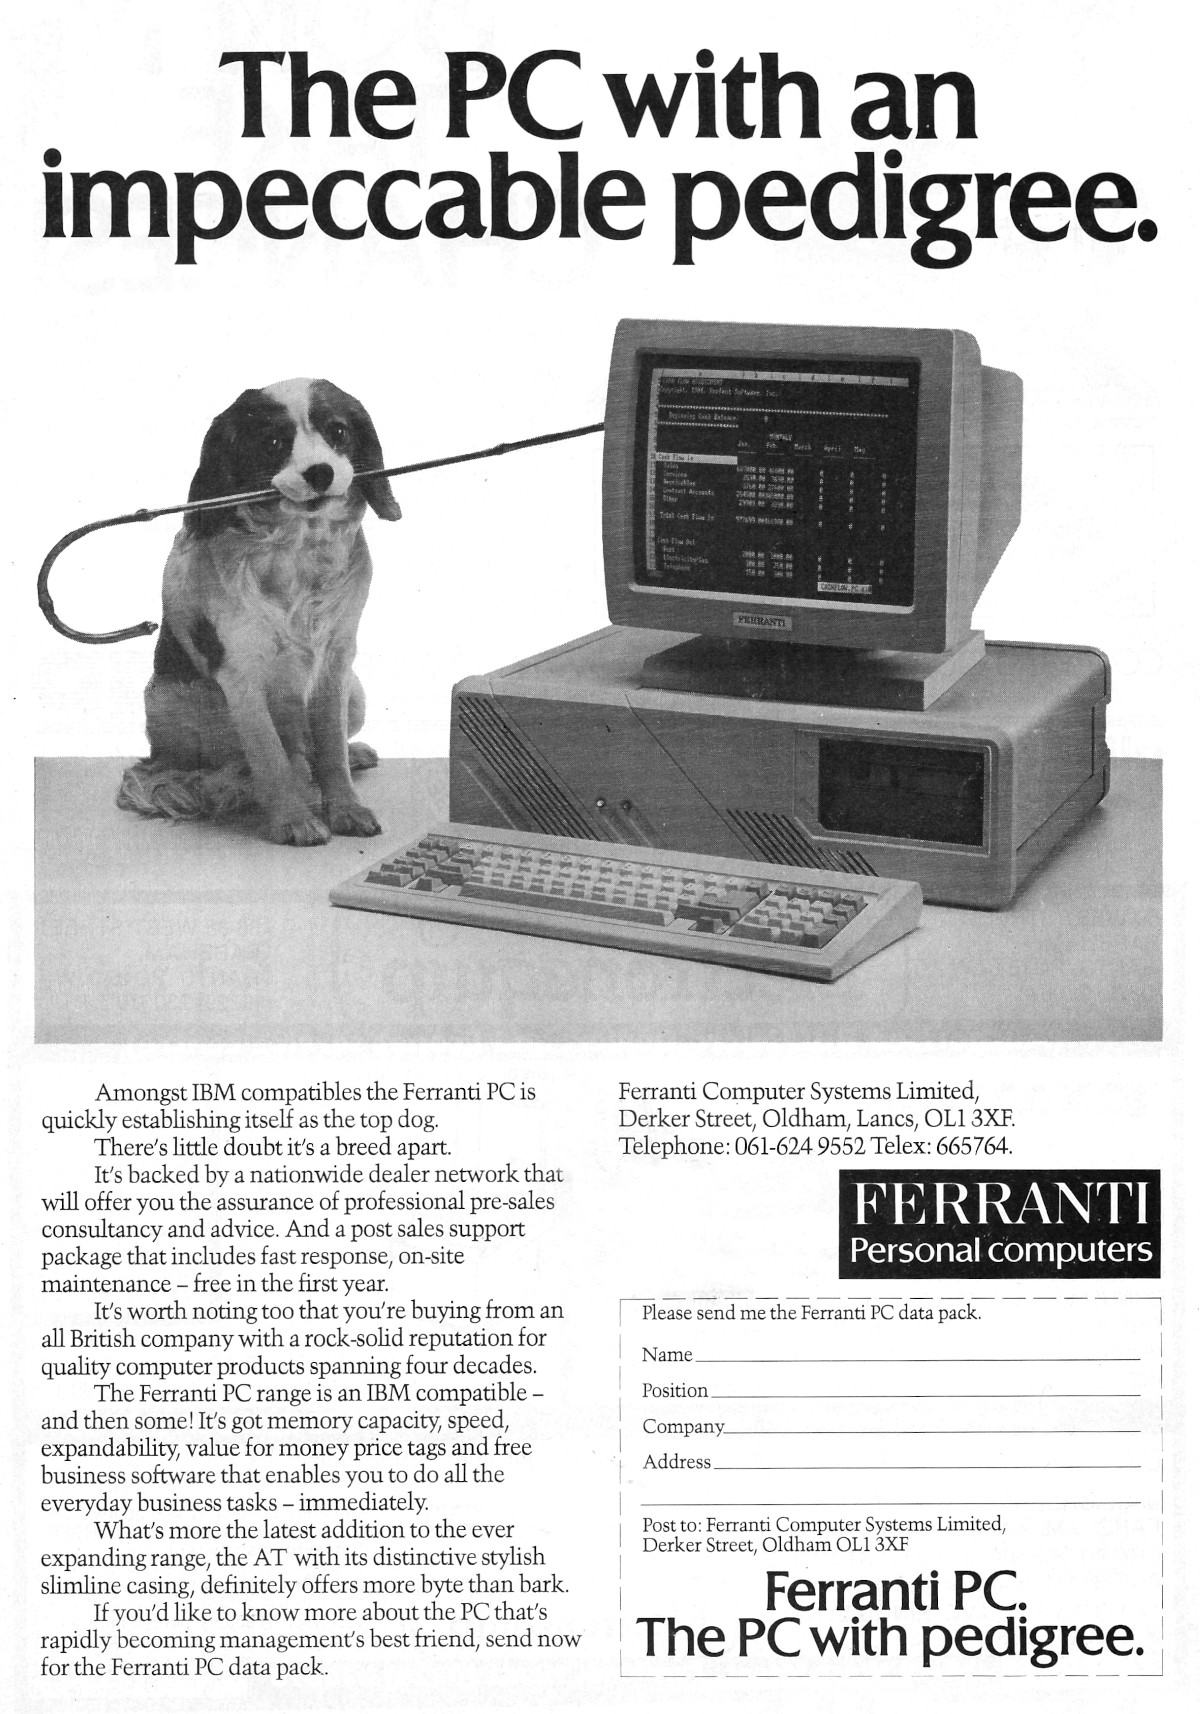 The original Ferranti PC AT, from Practical Computing, June 1986. Note the clear dig at IBM, with the dog holding Charlie Chaplin's cane in its mouth.